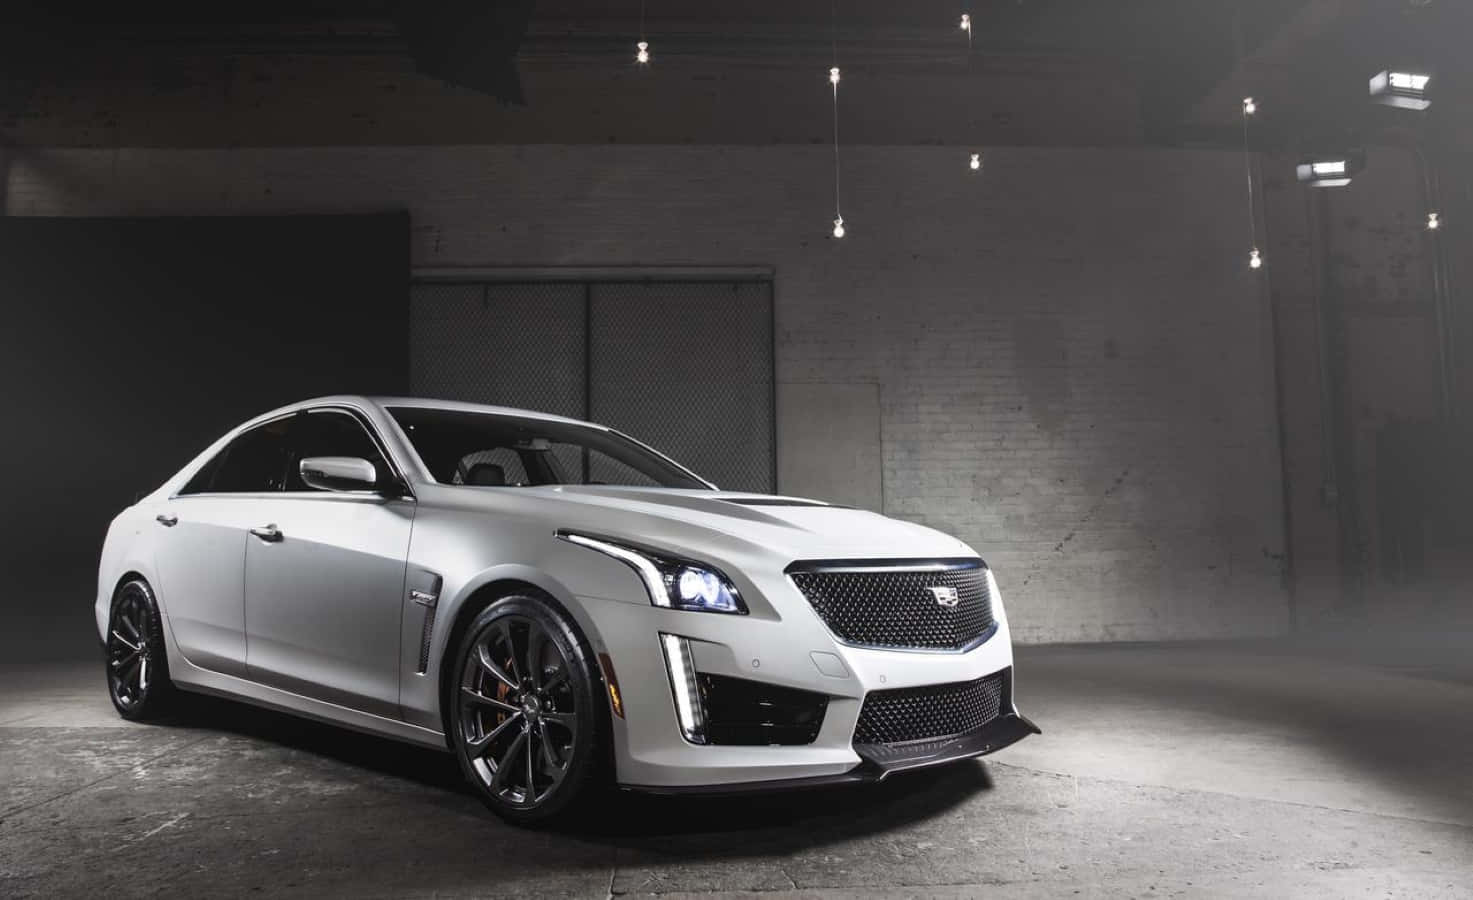 Sleek and Luxurious Cadillac CTS Standing Out on the Street in Nighttime Wallpaper